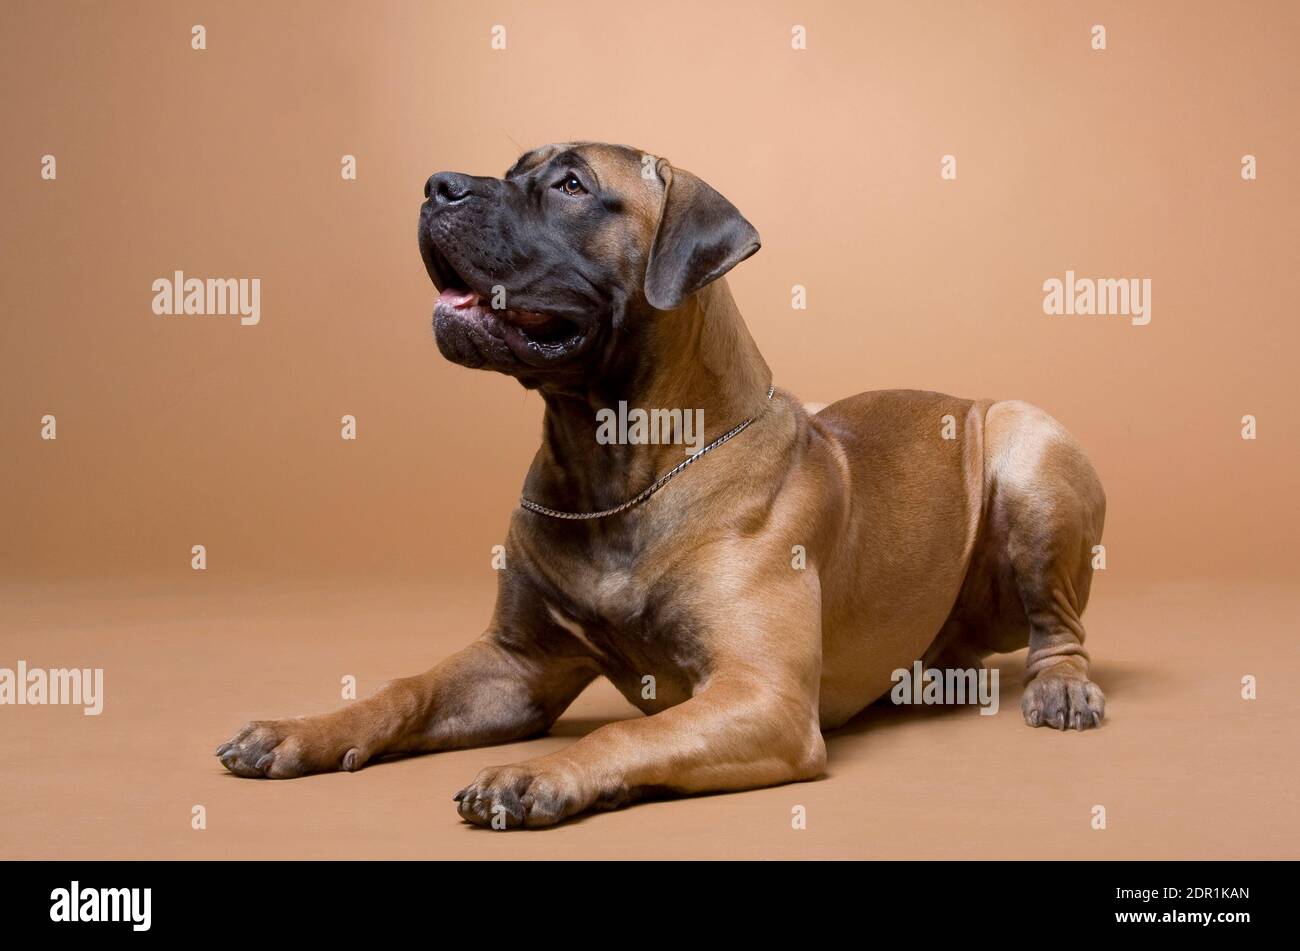 large red dog South African boerboel breed is photographed in a photo studio on a red background Stock Photo